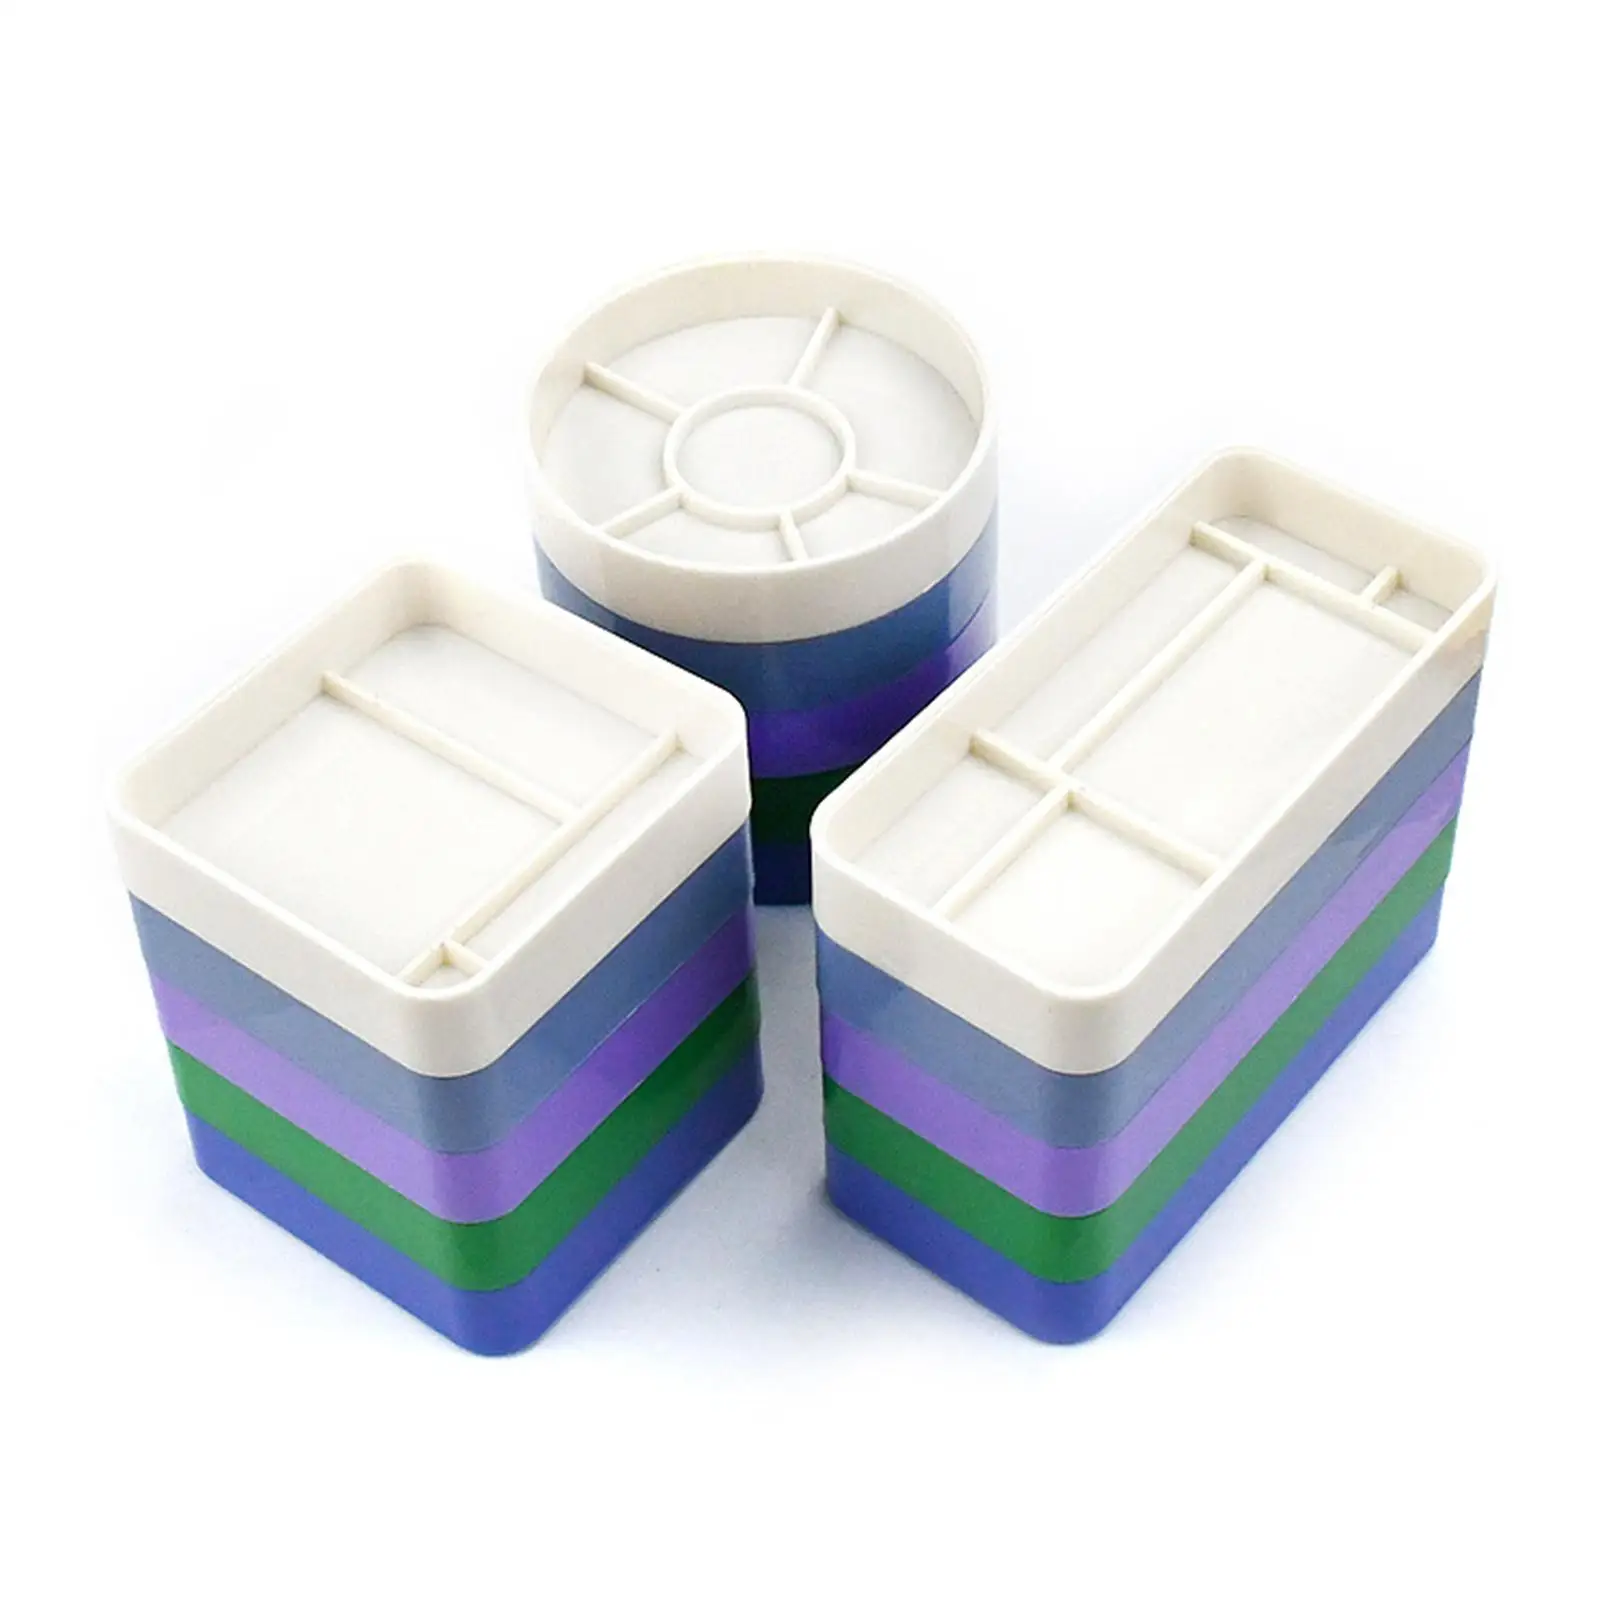 5 Layer Watch Parts Storage Box Colorful Plastic Container for Watch Movement Parts Crafts Small Parts Beads Jewelry